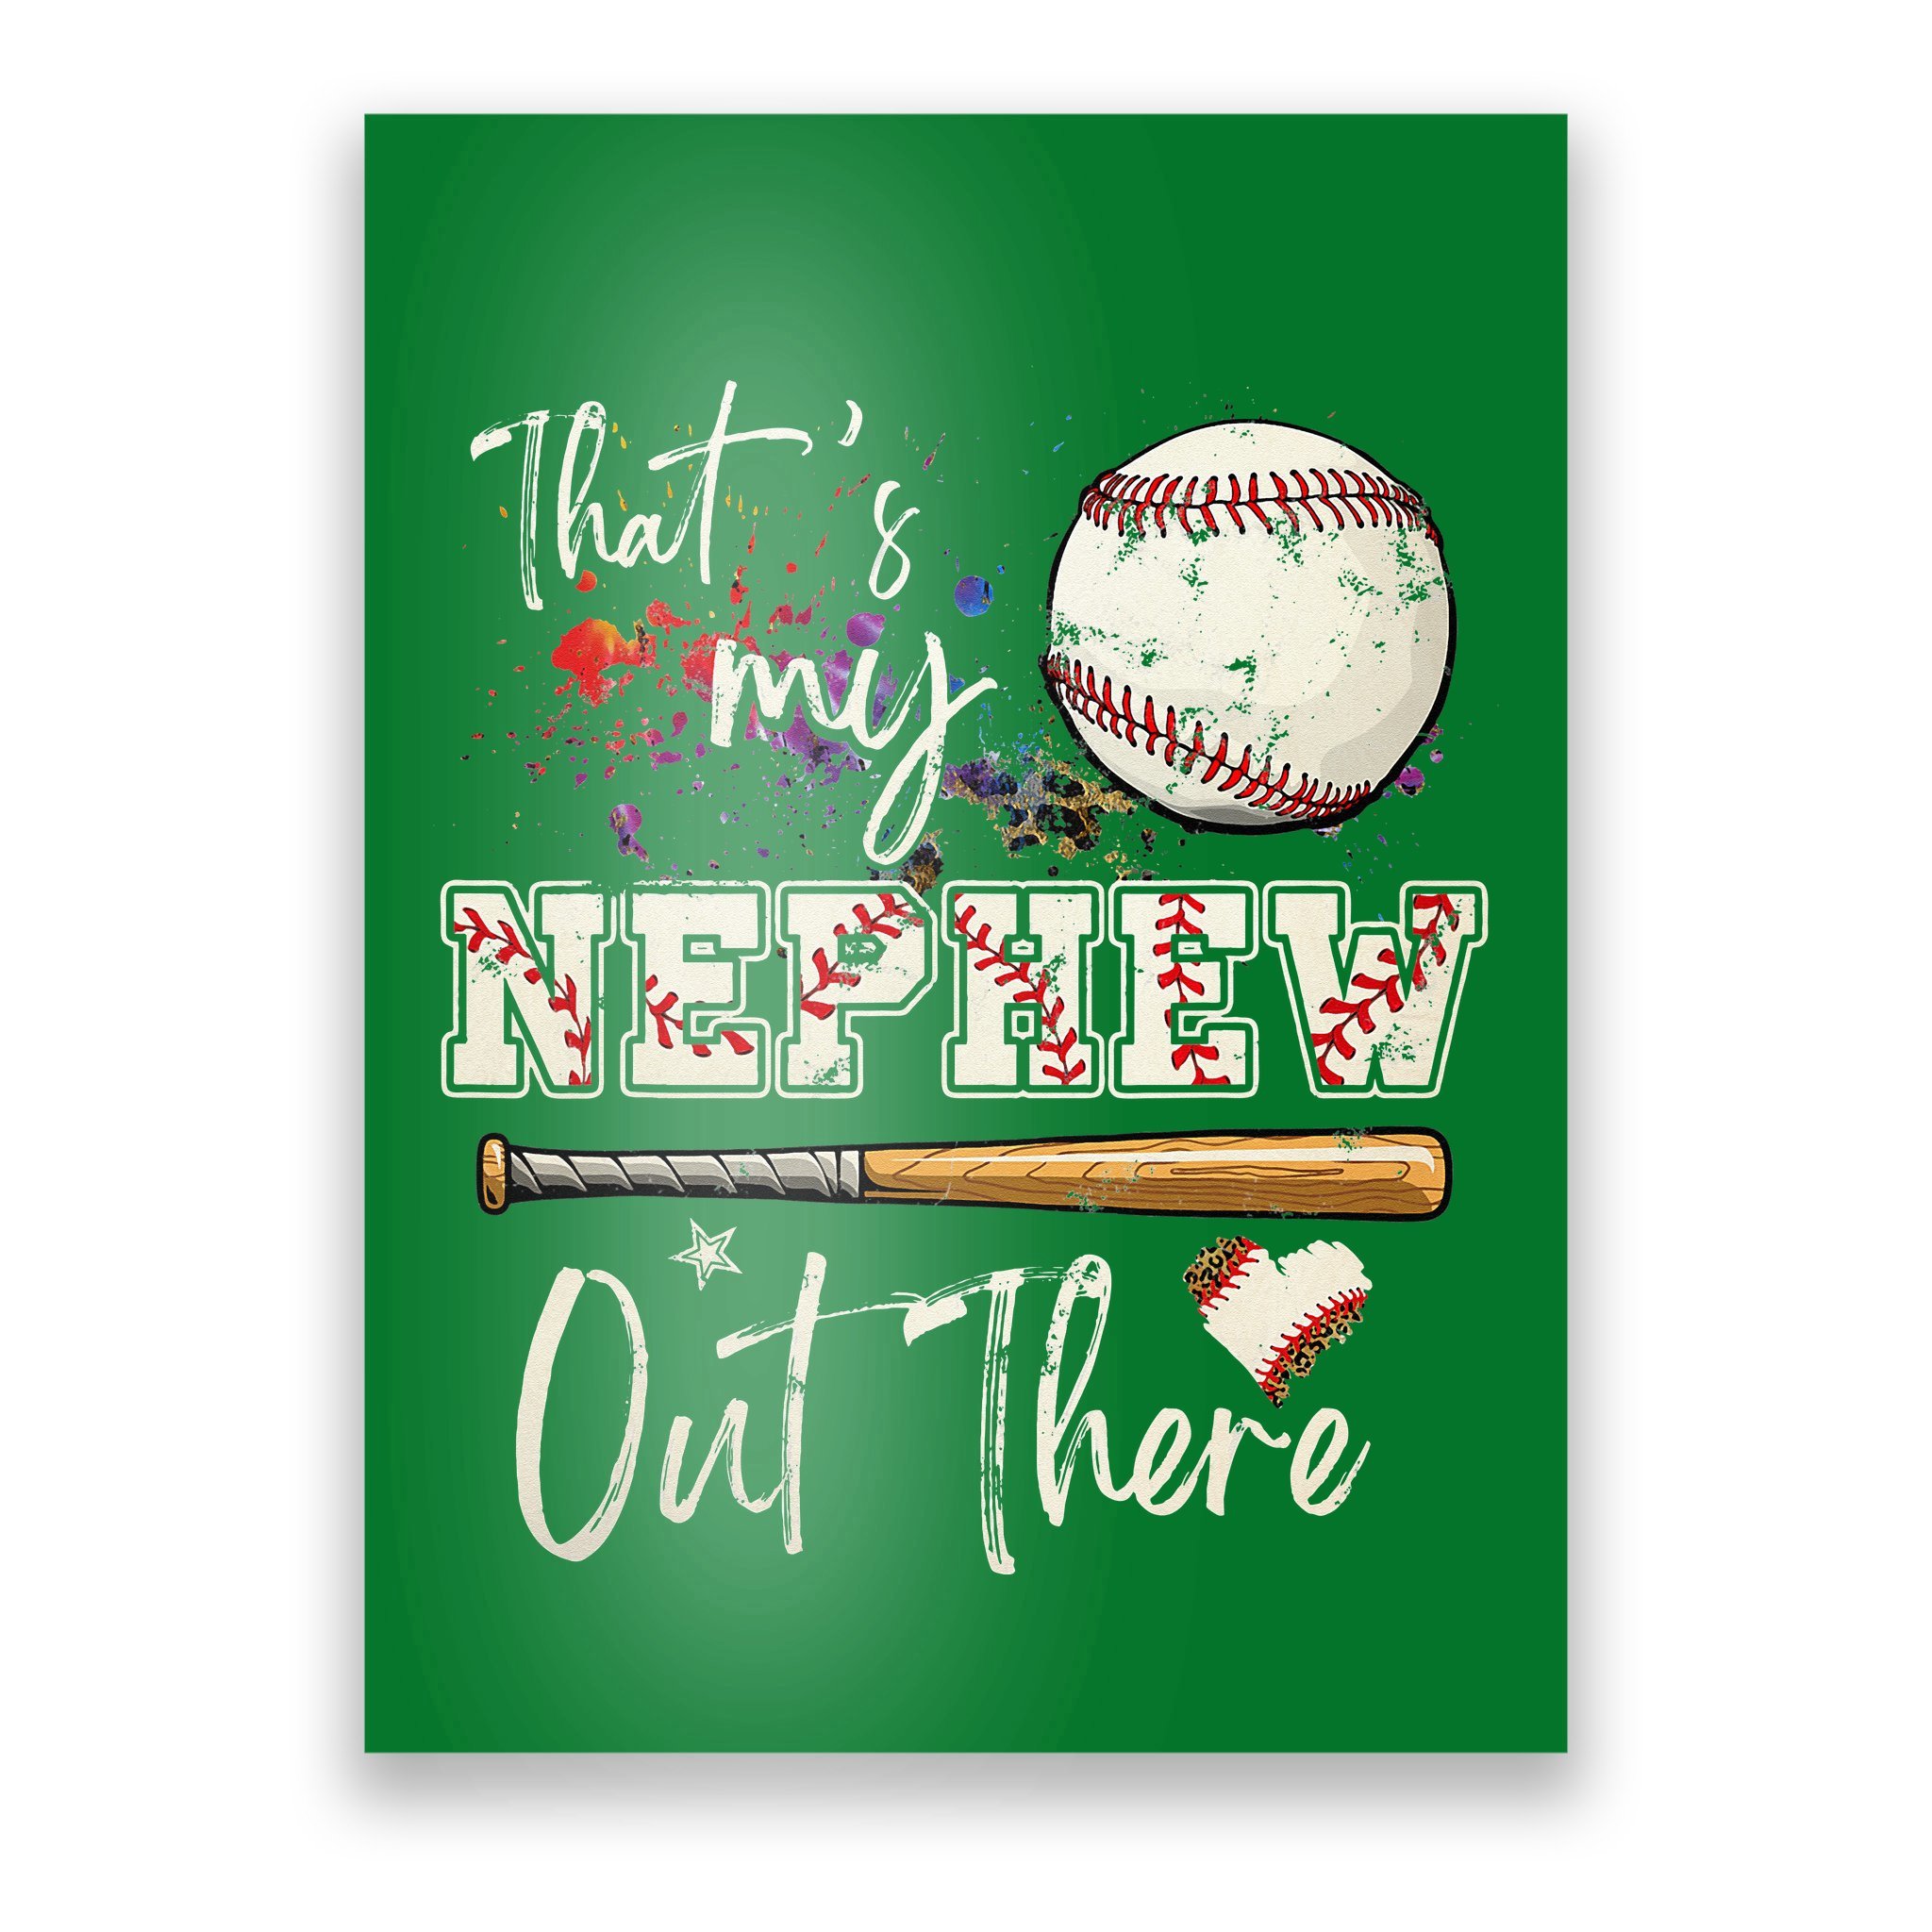 mother's day baseball quotes